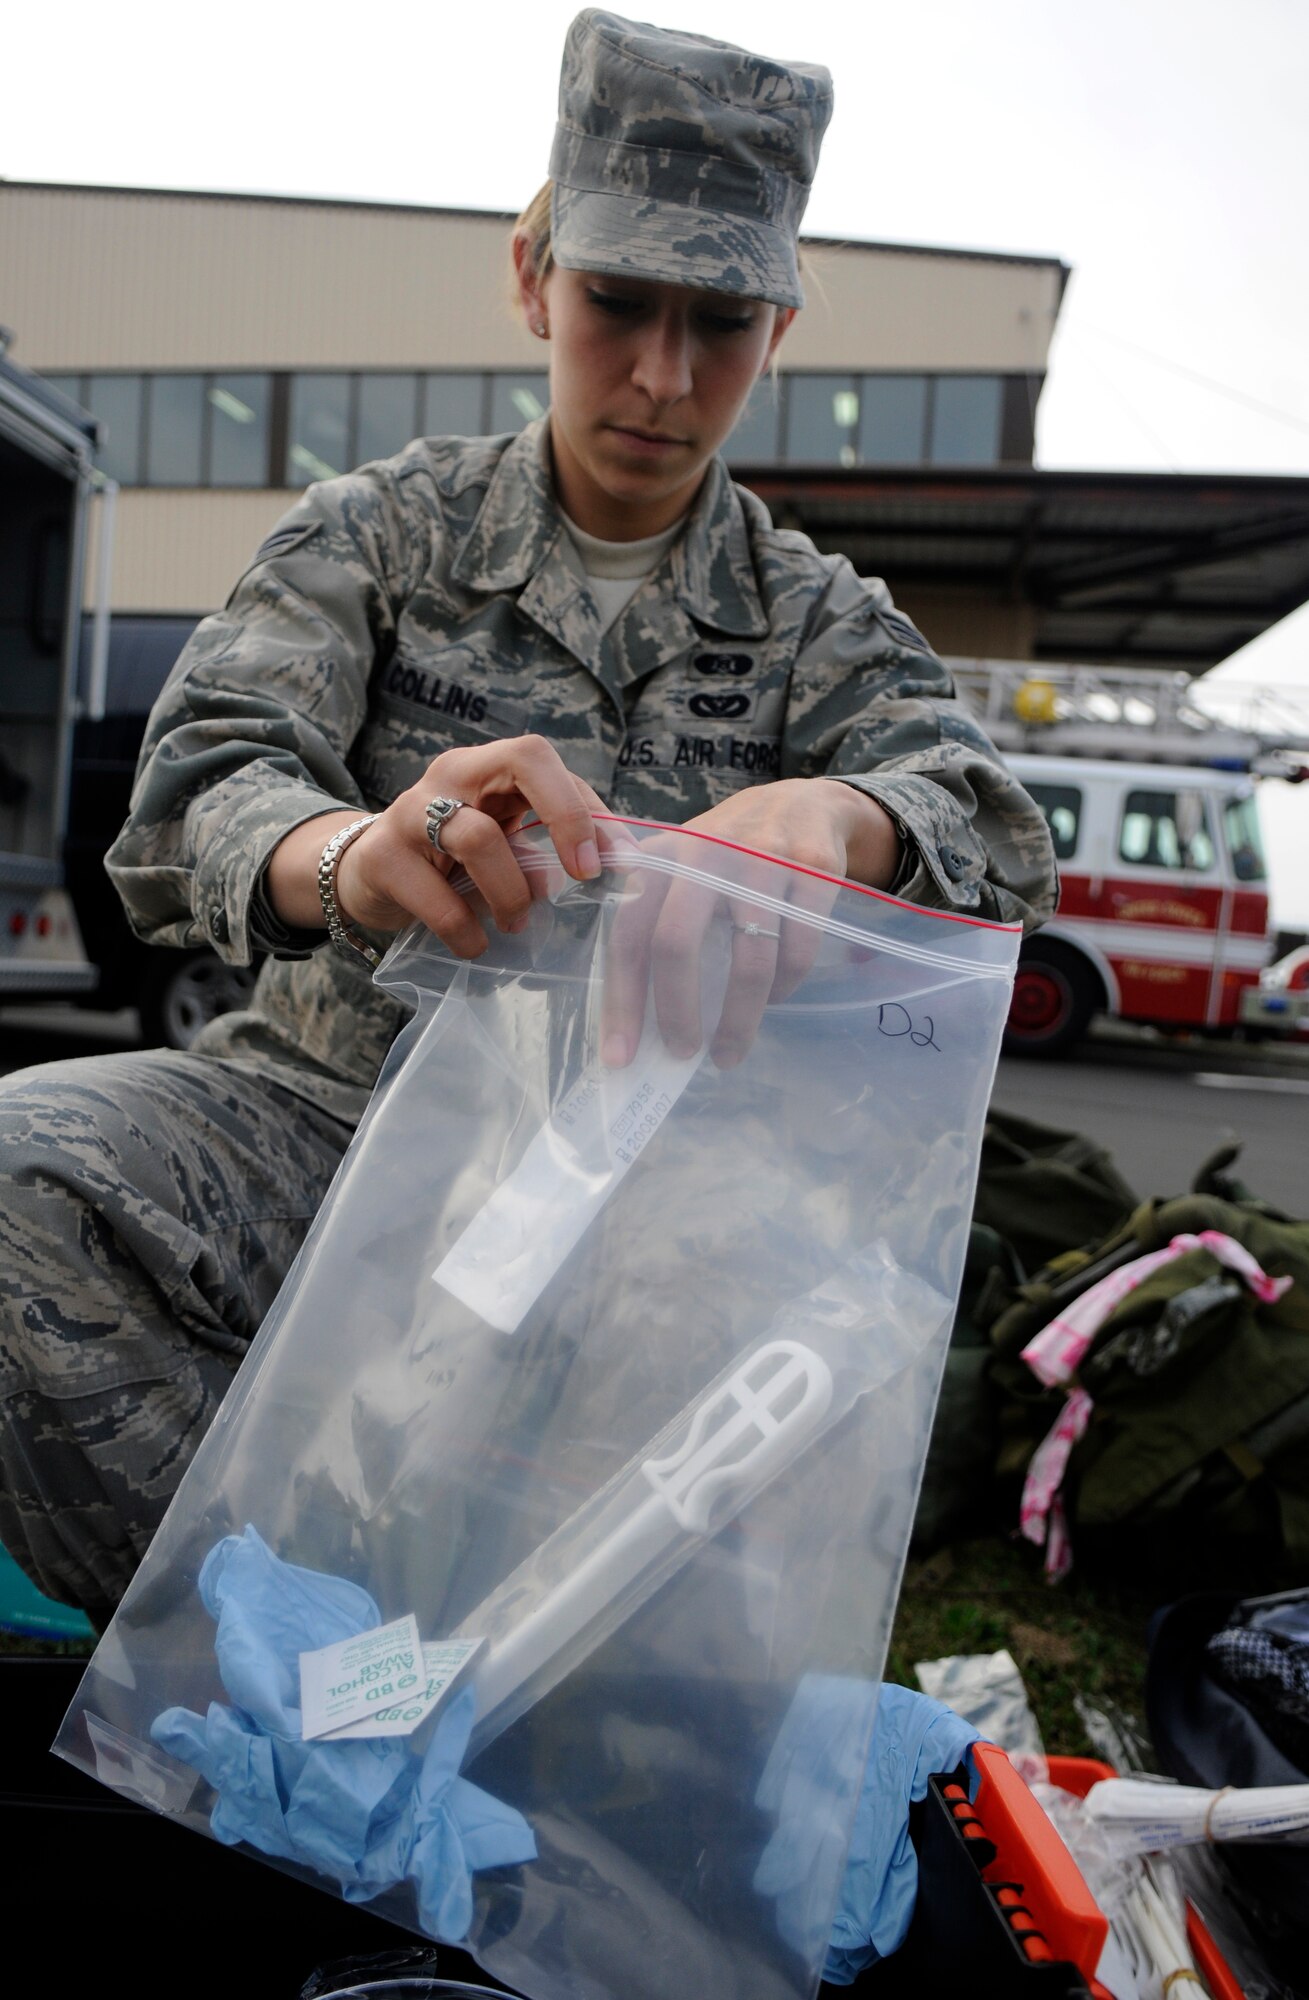 SPANGDAHLEM AIR BASE, Germany – Senior Airman Briana Collins, 52nd Civil Engineer Squadron, prepares specimen bags to use during an all hazards response training emergency management and mass casualty exercise Oct. 7. The specimen bags were later used to help identify what simulated chemical was released in the air. (U.S. Air Force photo/Airman 1st Class Staci Miller)